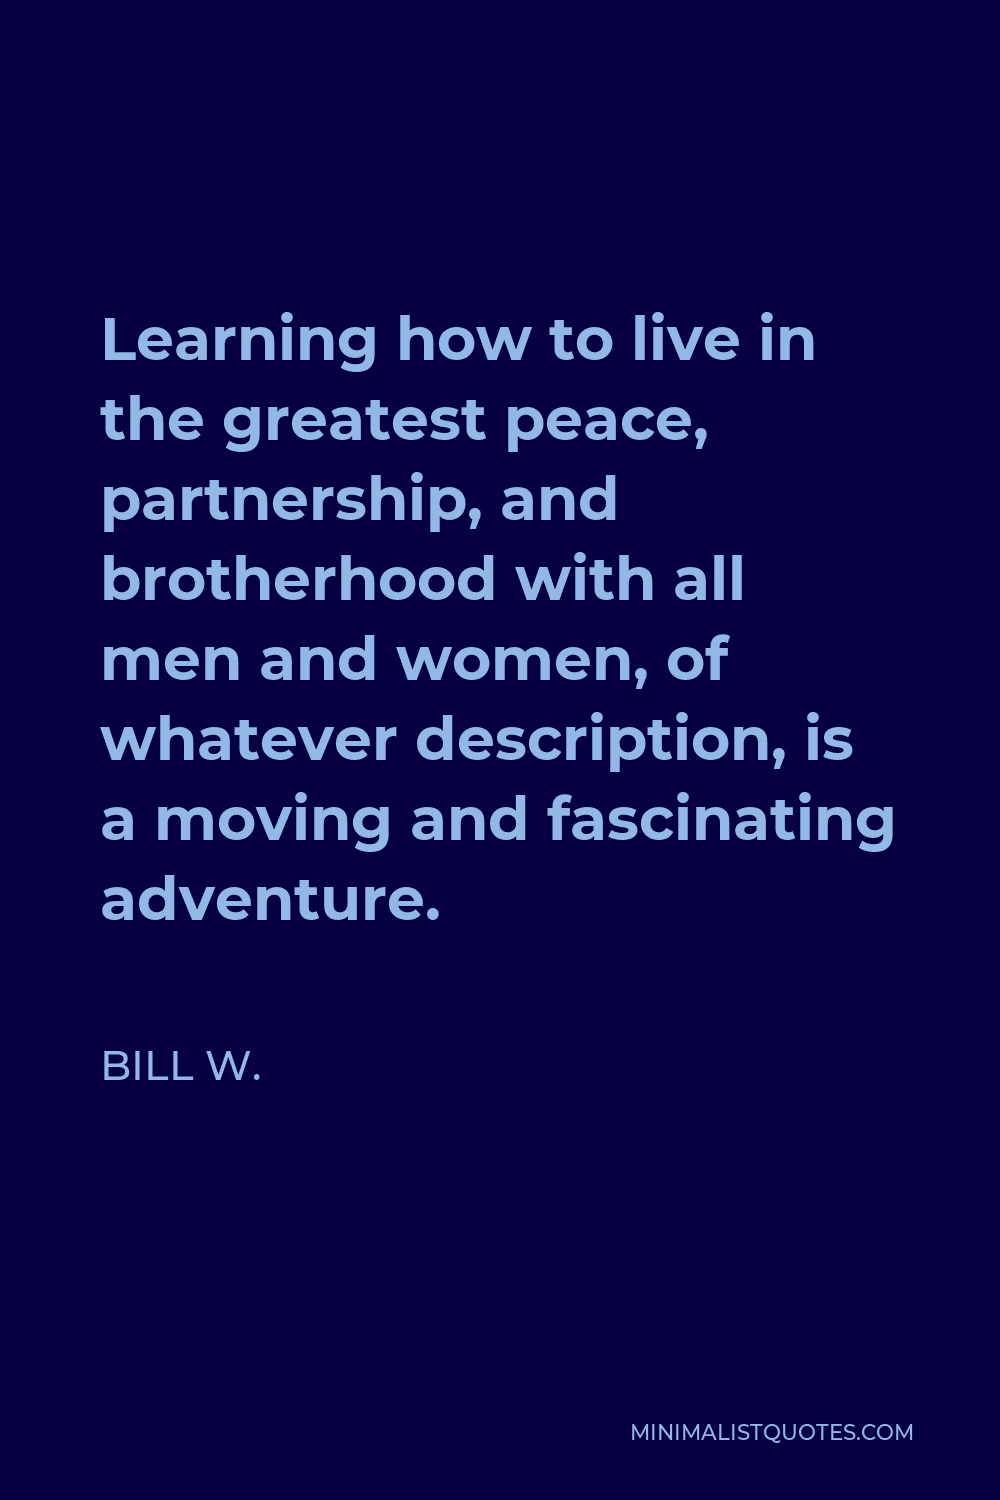 Bill W. Quote - Learning how to live in the greatest peace, partnership, and brotherhood with all men and women, of whatever description, is a moving and fascinating adventure.